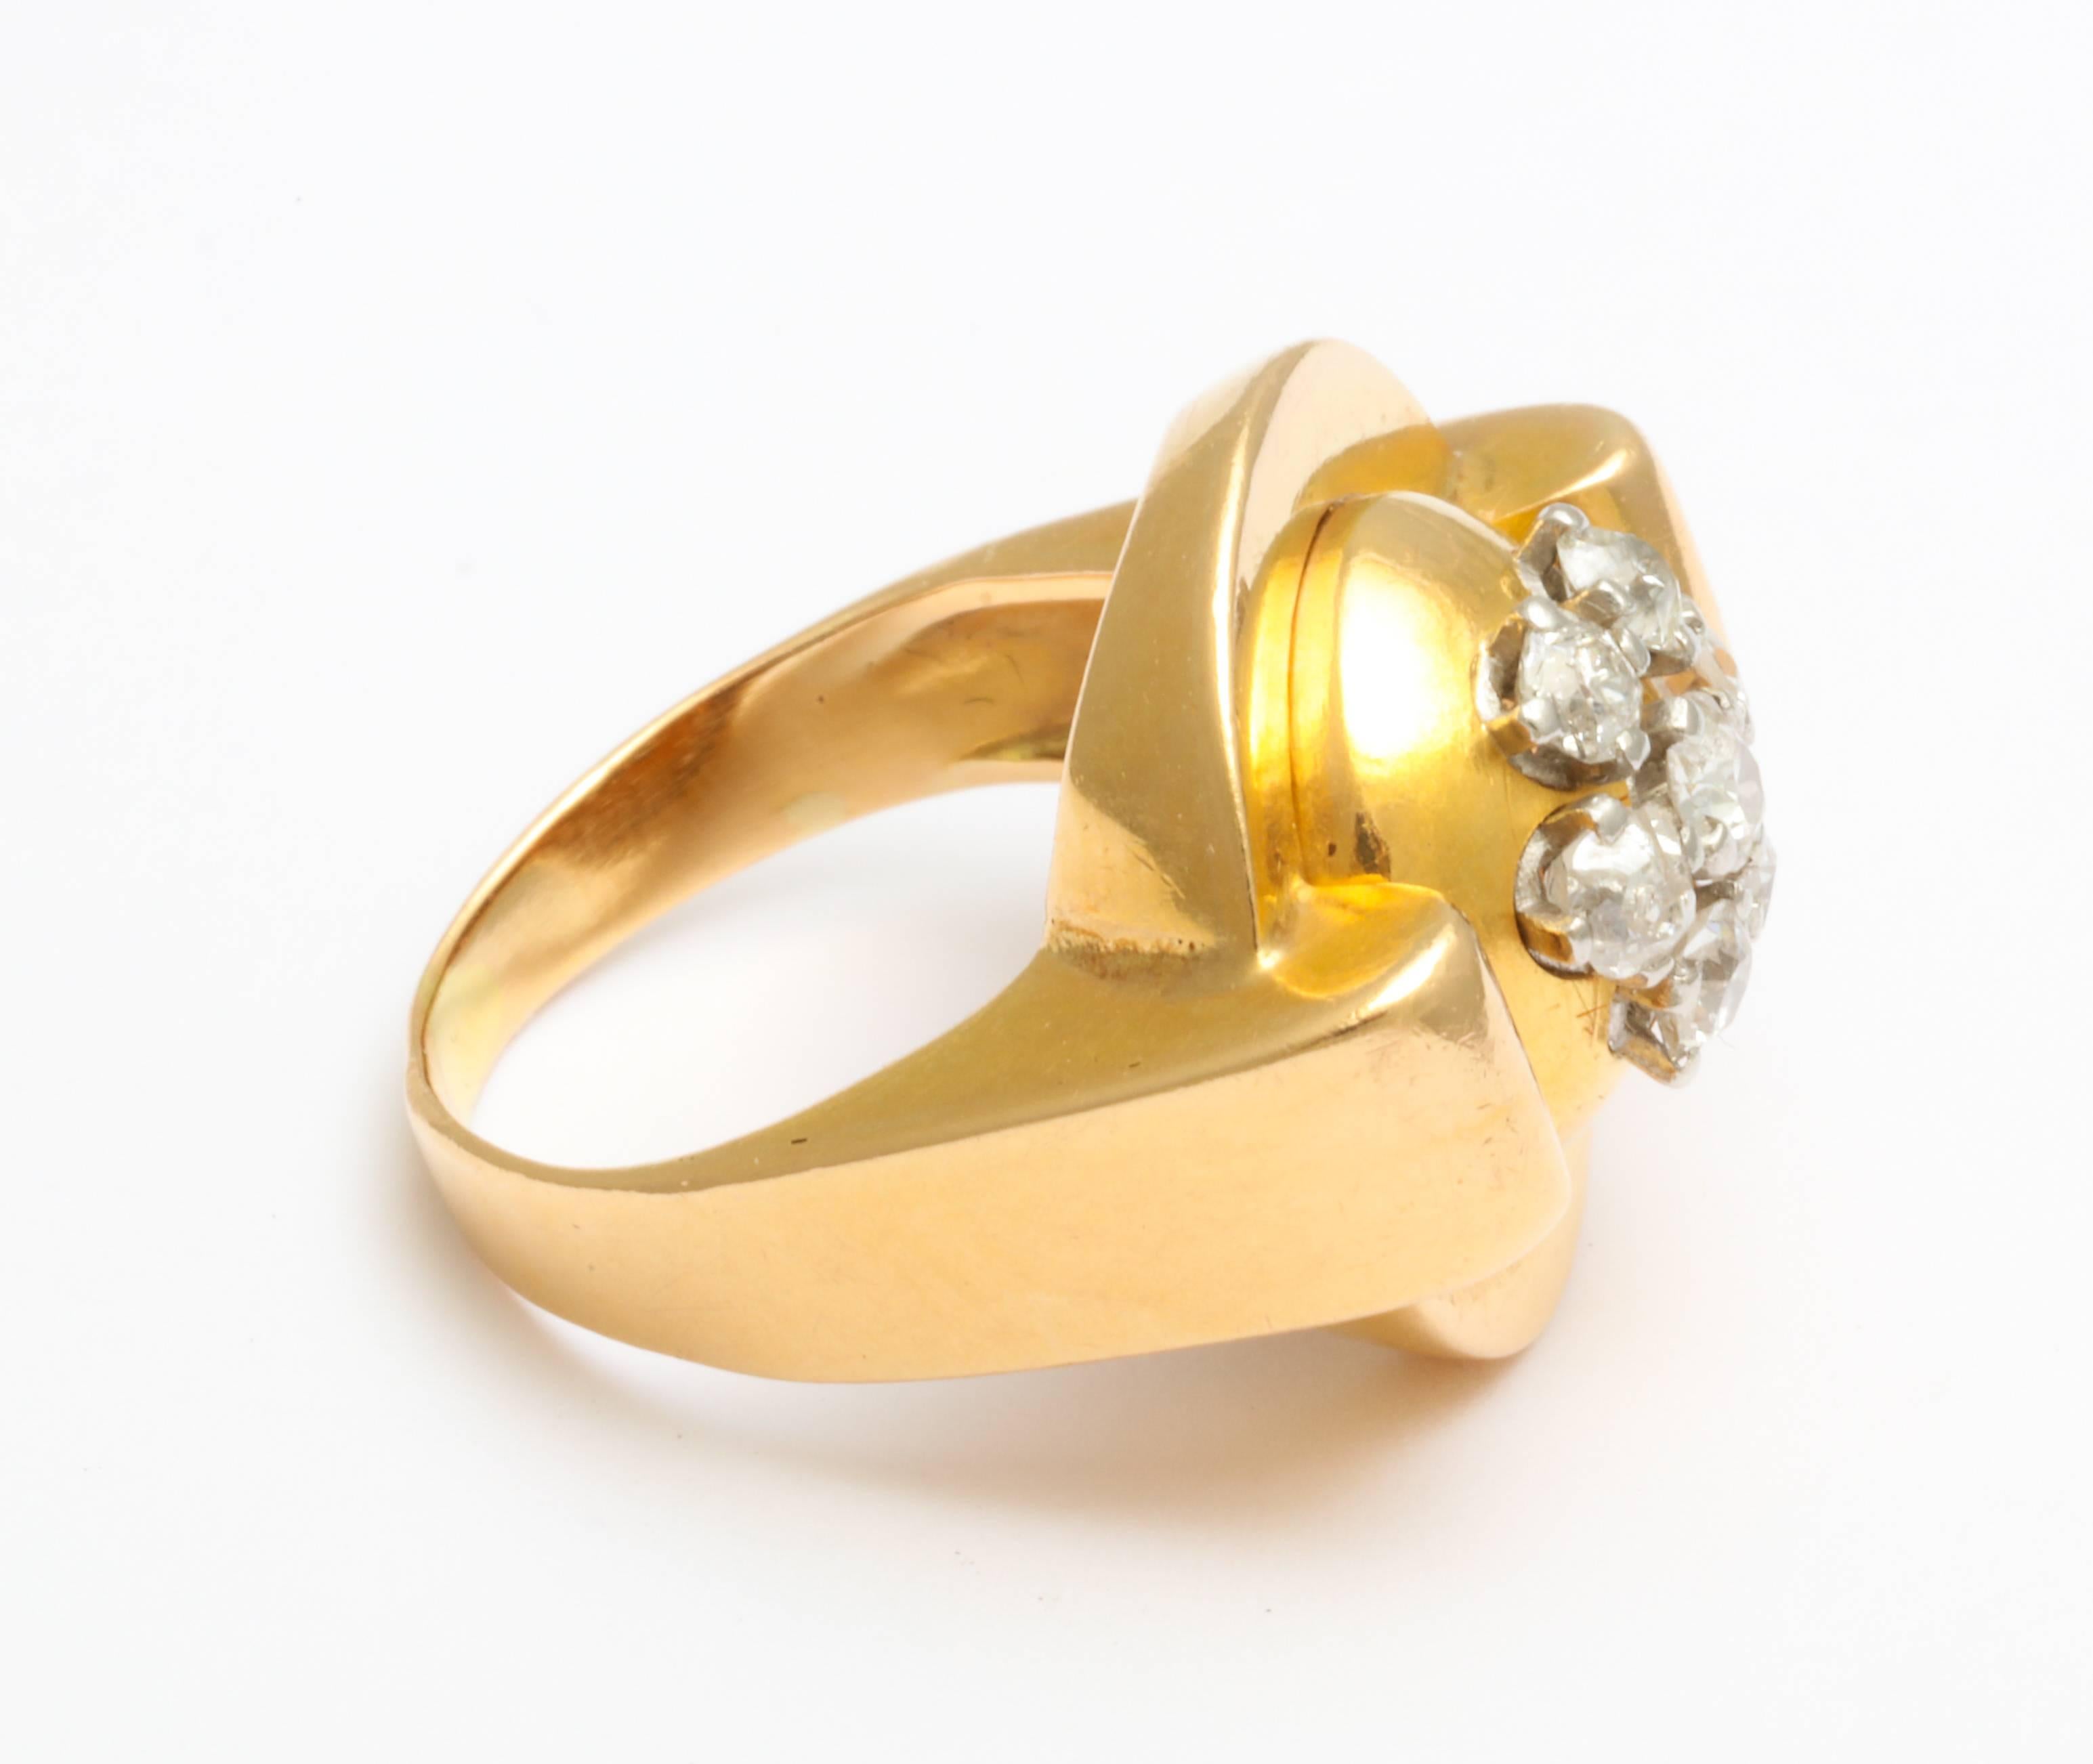 A Classic retro 18-karat French gold ring with a grouping of five mine cut diamonds flanked by buttresses that protect the mounted diamonds and give it a clean modernist look that is very in keeping with today’s fashions.